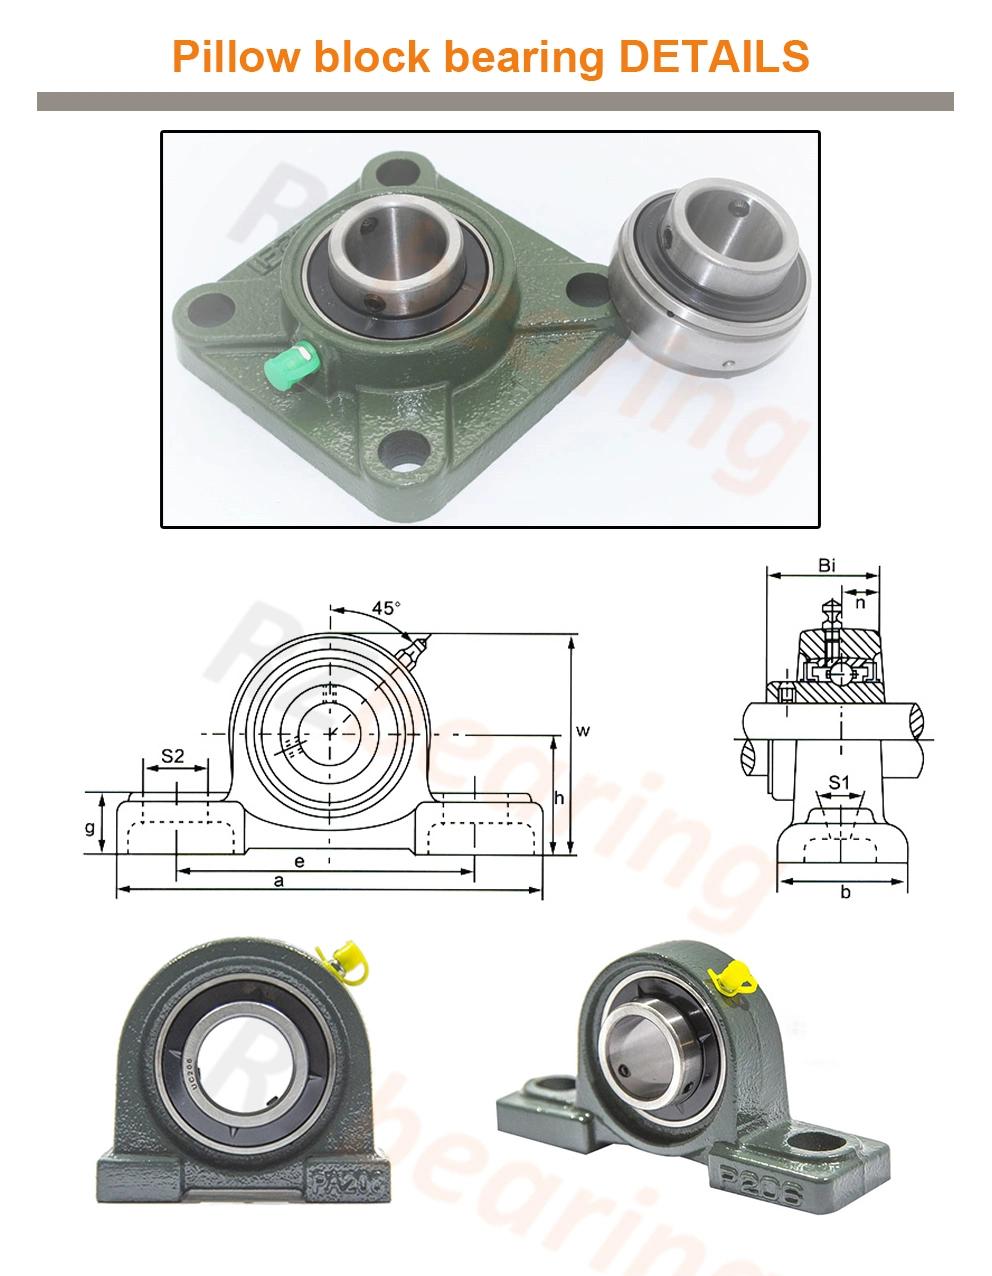 Bearings Wheel Hub Bearing for Agricultural Machinery Pillow Block Bearing UCFL205 with High Quality